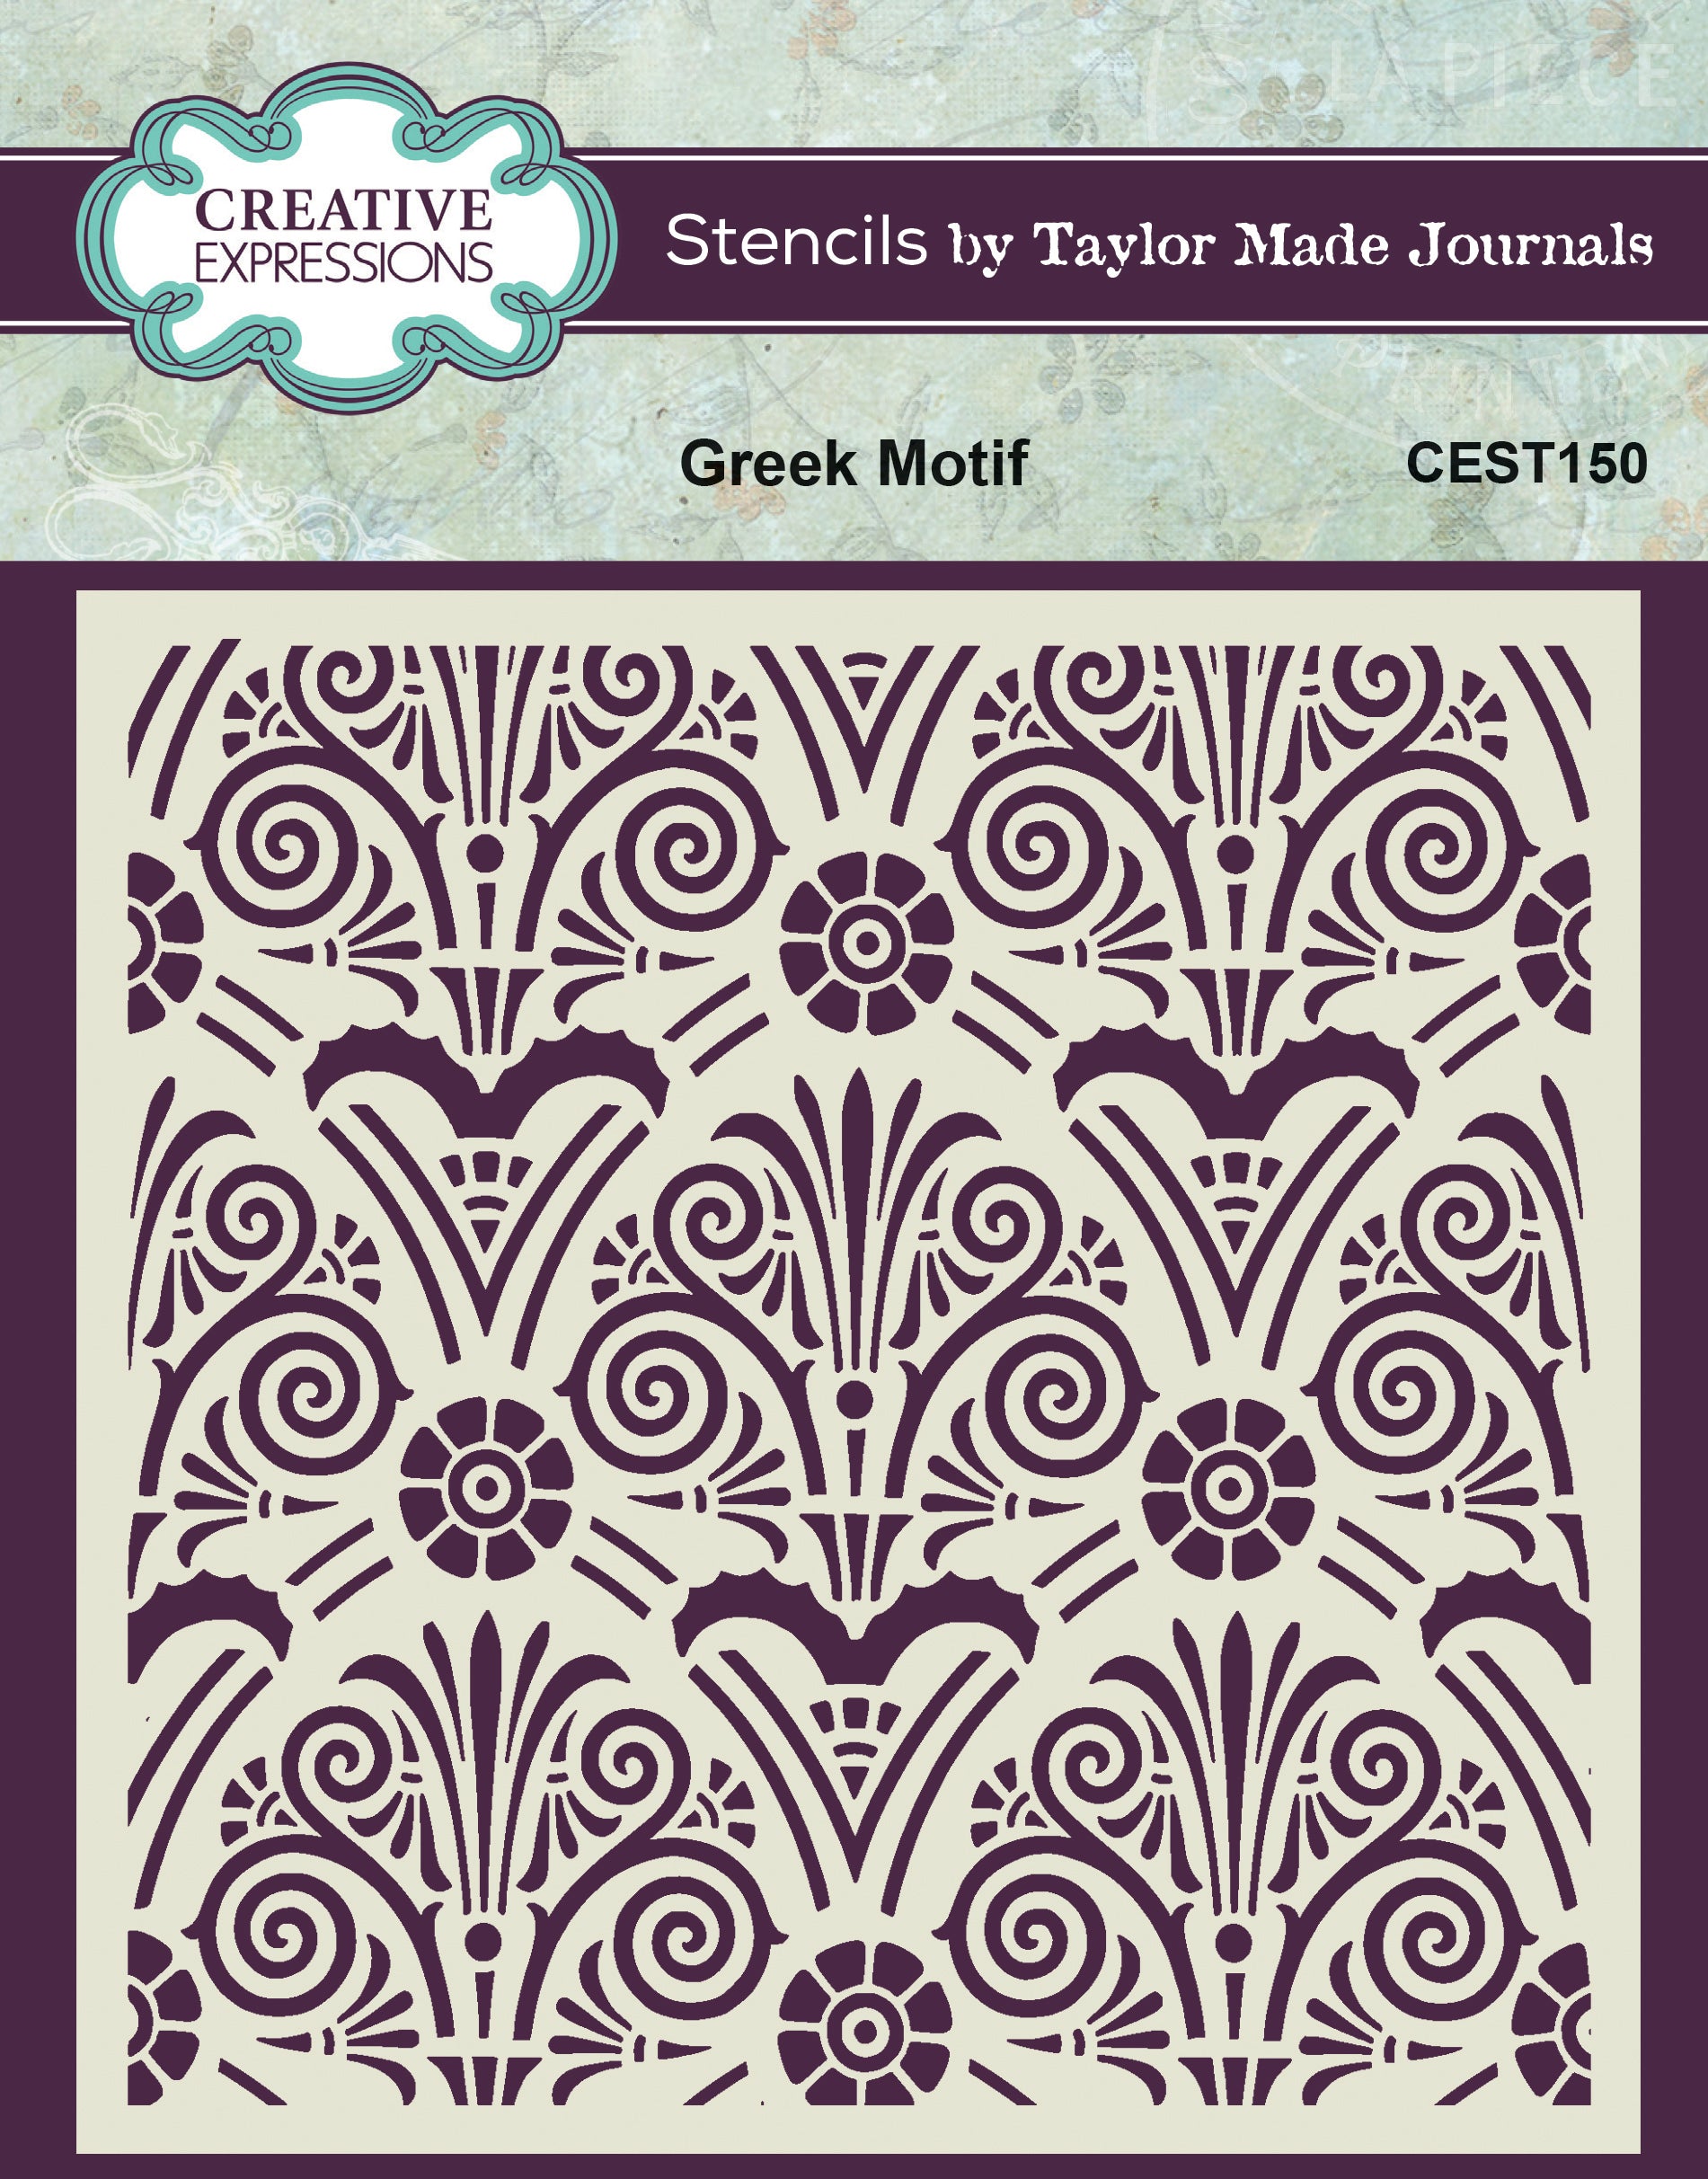 Creative Expressions Taylor Made Journals Greek Motif 6 in x 6 in Stencil